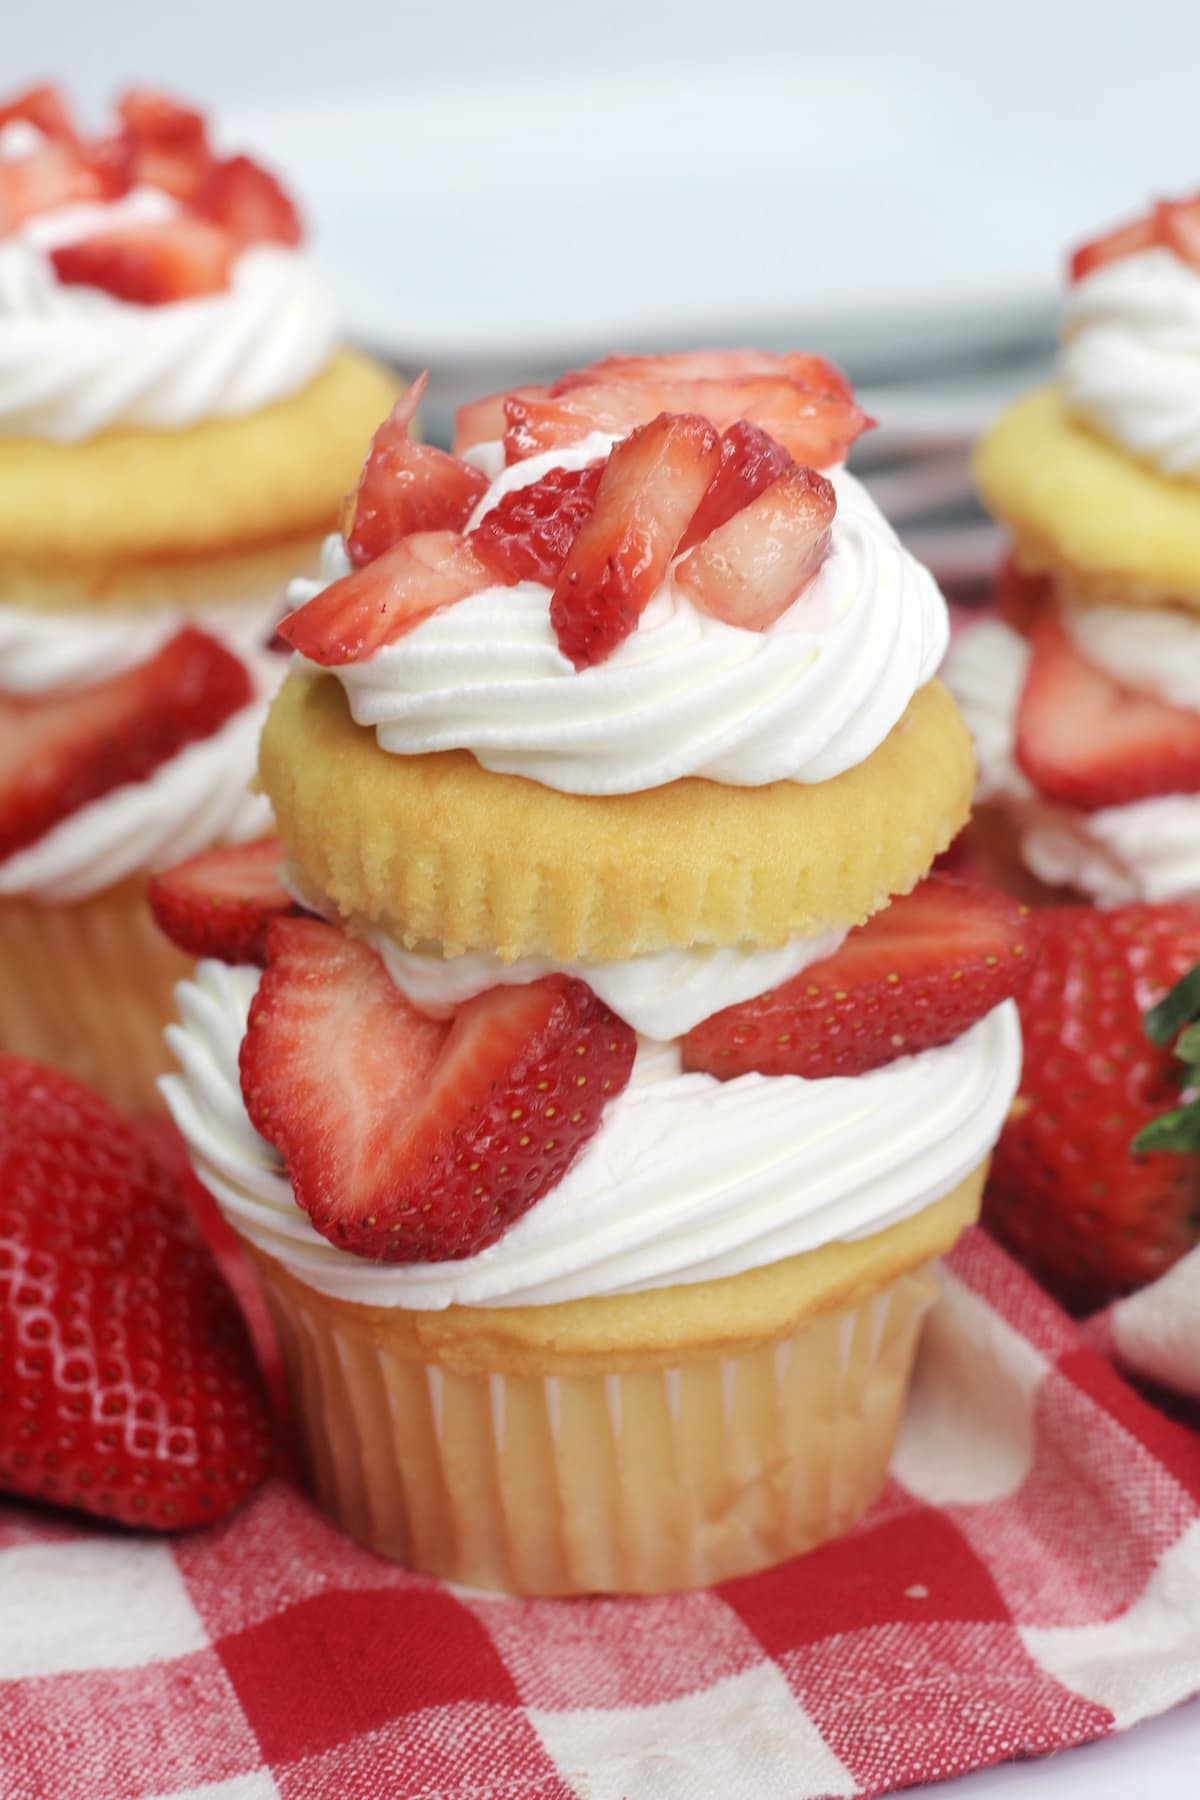 A strawberry shortcake cupcake on a red checkered cloth